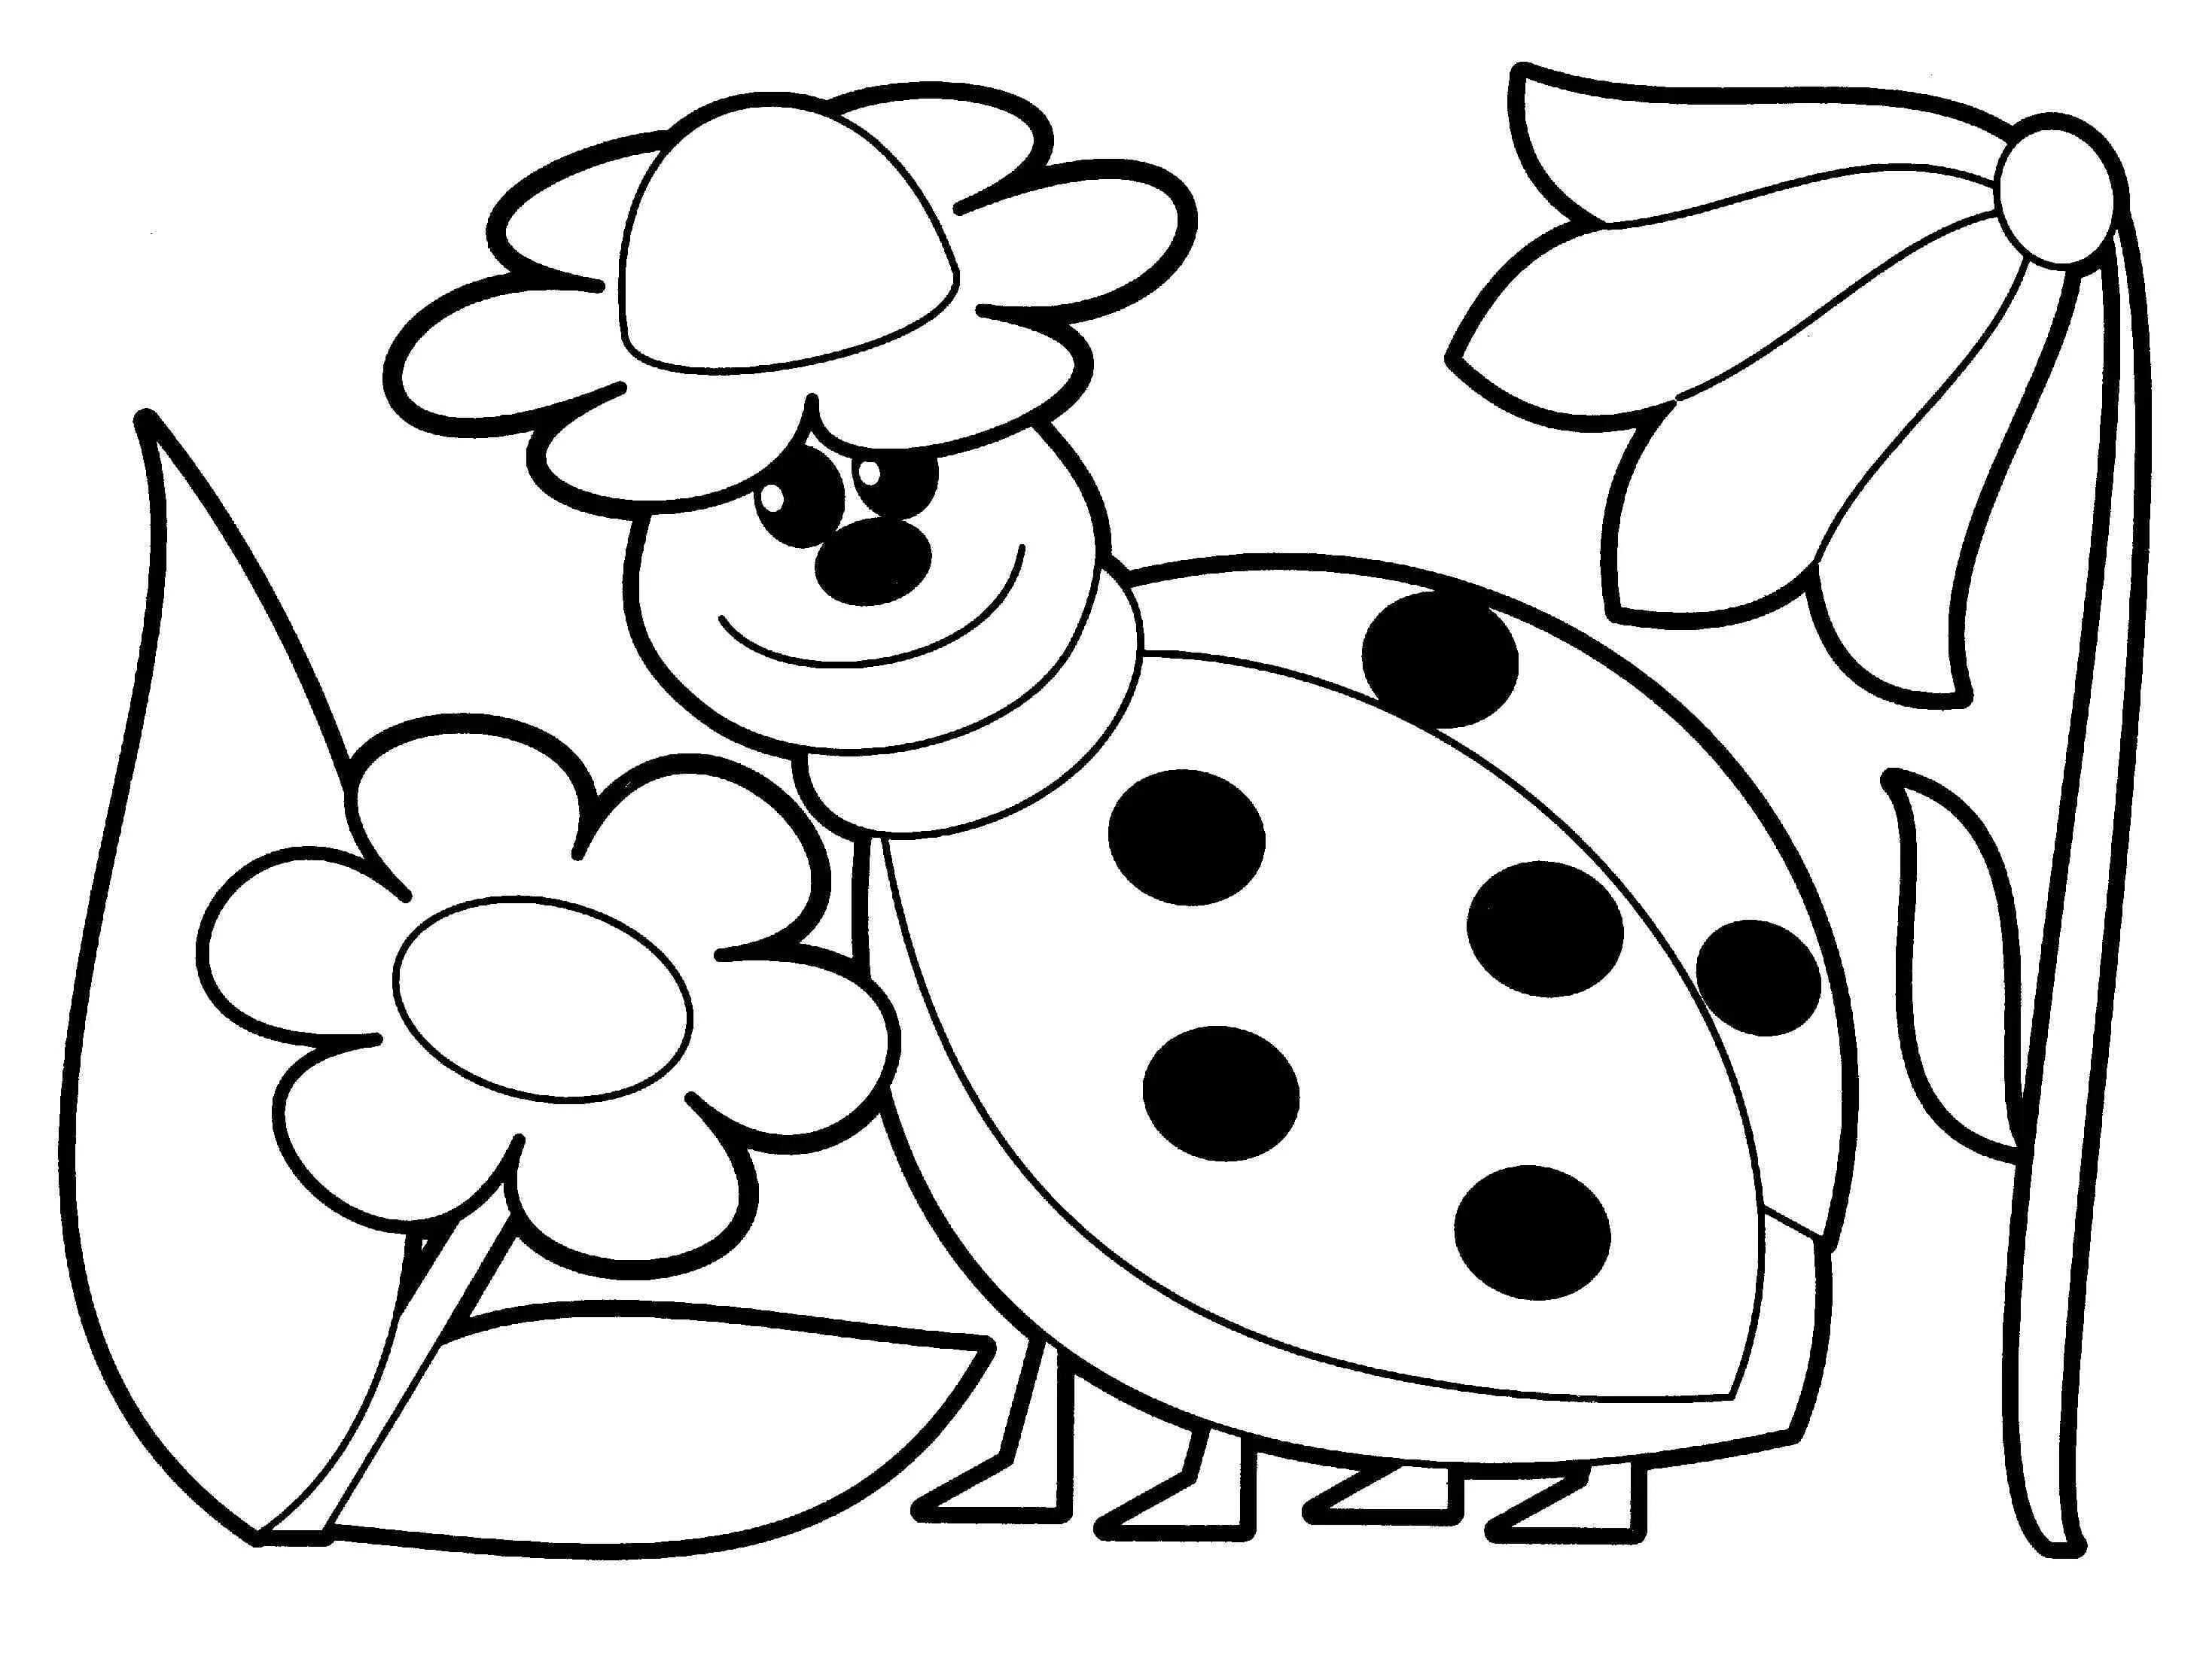 Great ladybug coloring book for 3-4 year olds